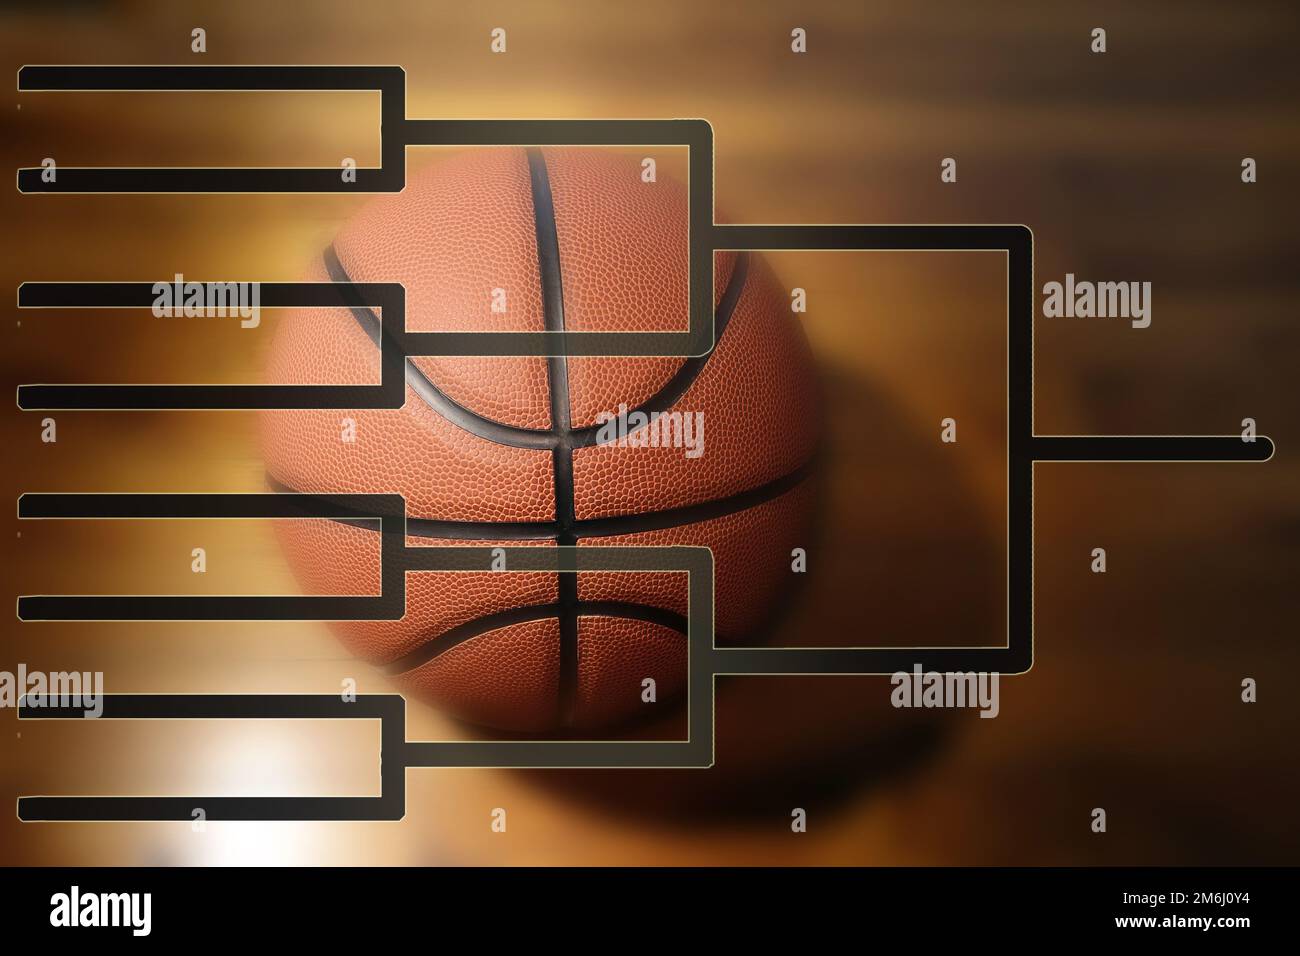 Tournament Bracket Images – Browse 81,089 Stock Photos, Vectors, and Video